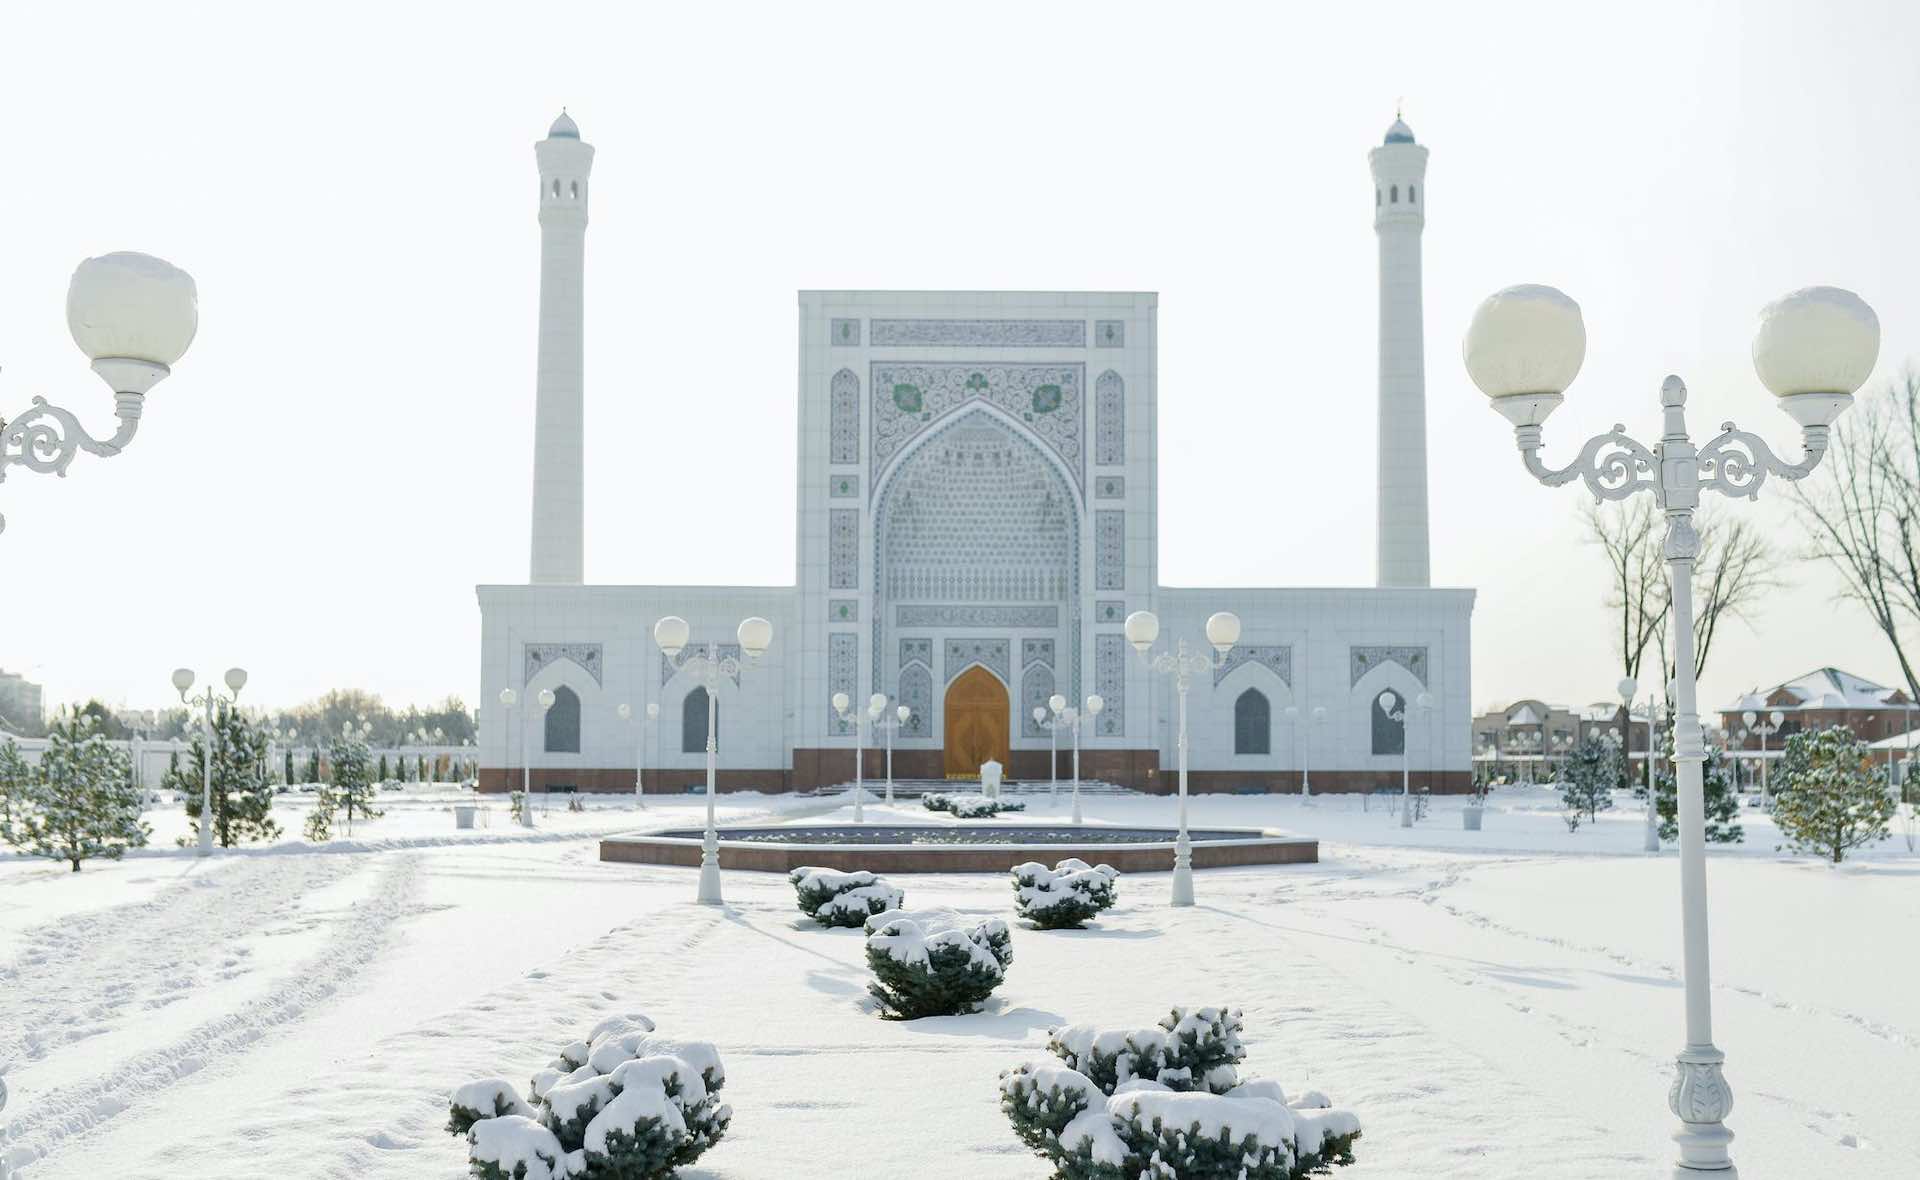 New route launched by Wizz Air Abu Dhabi to Tashkent, Uzbekistan